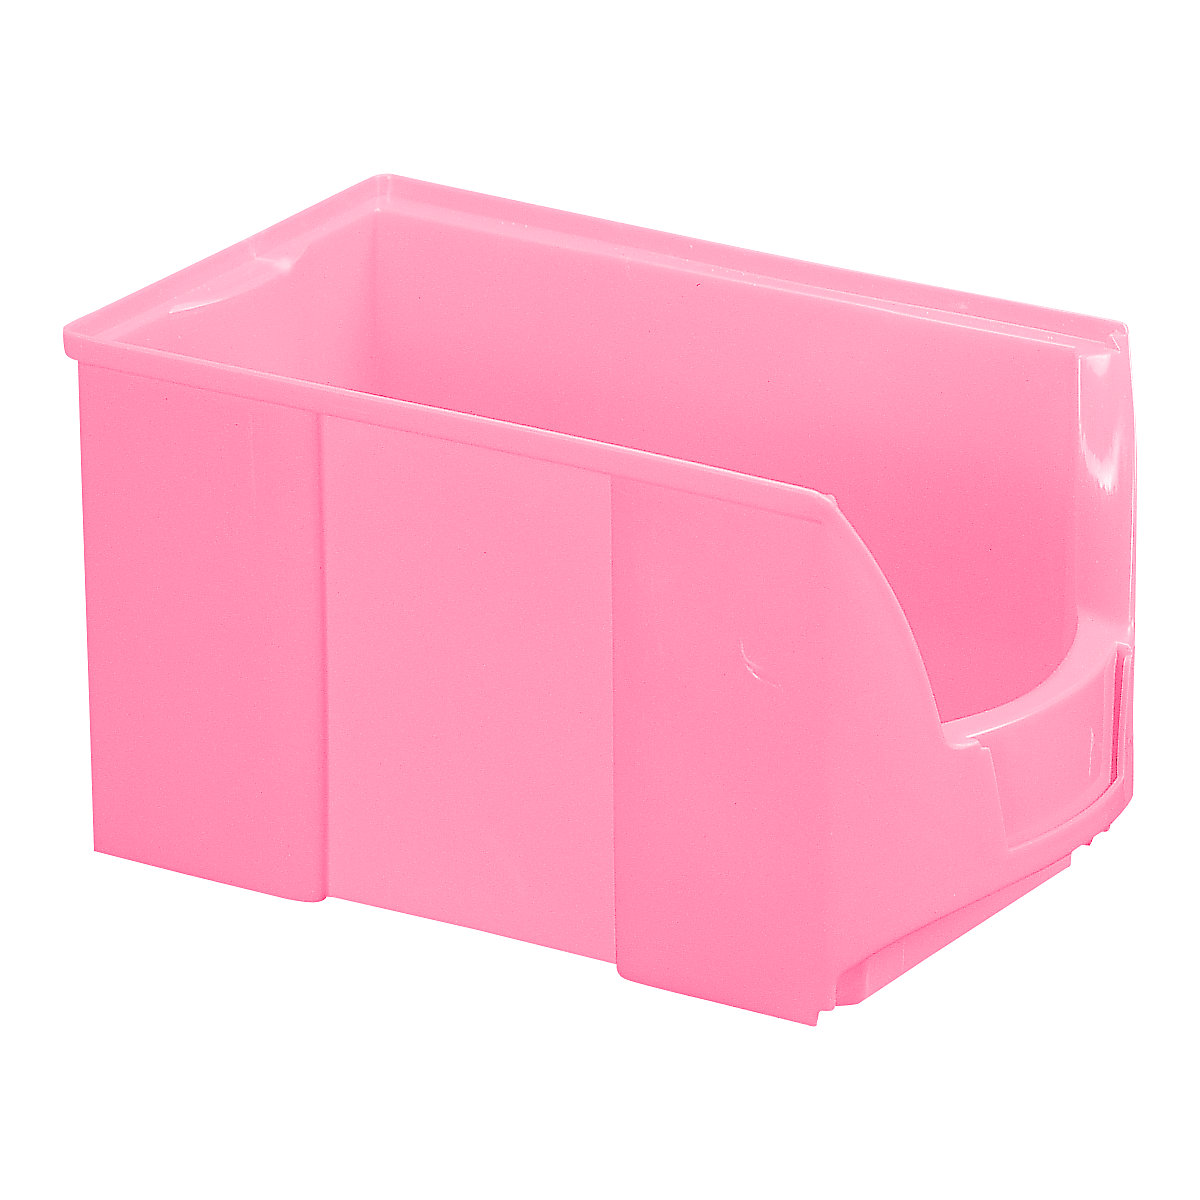 FUTURA open fronted storage bin made of polyethylene, LxWxH 360 x 208 x 201 mm, pack of 8, red-17